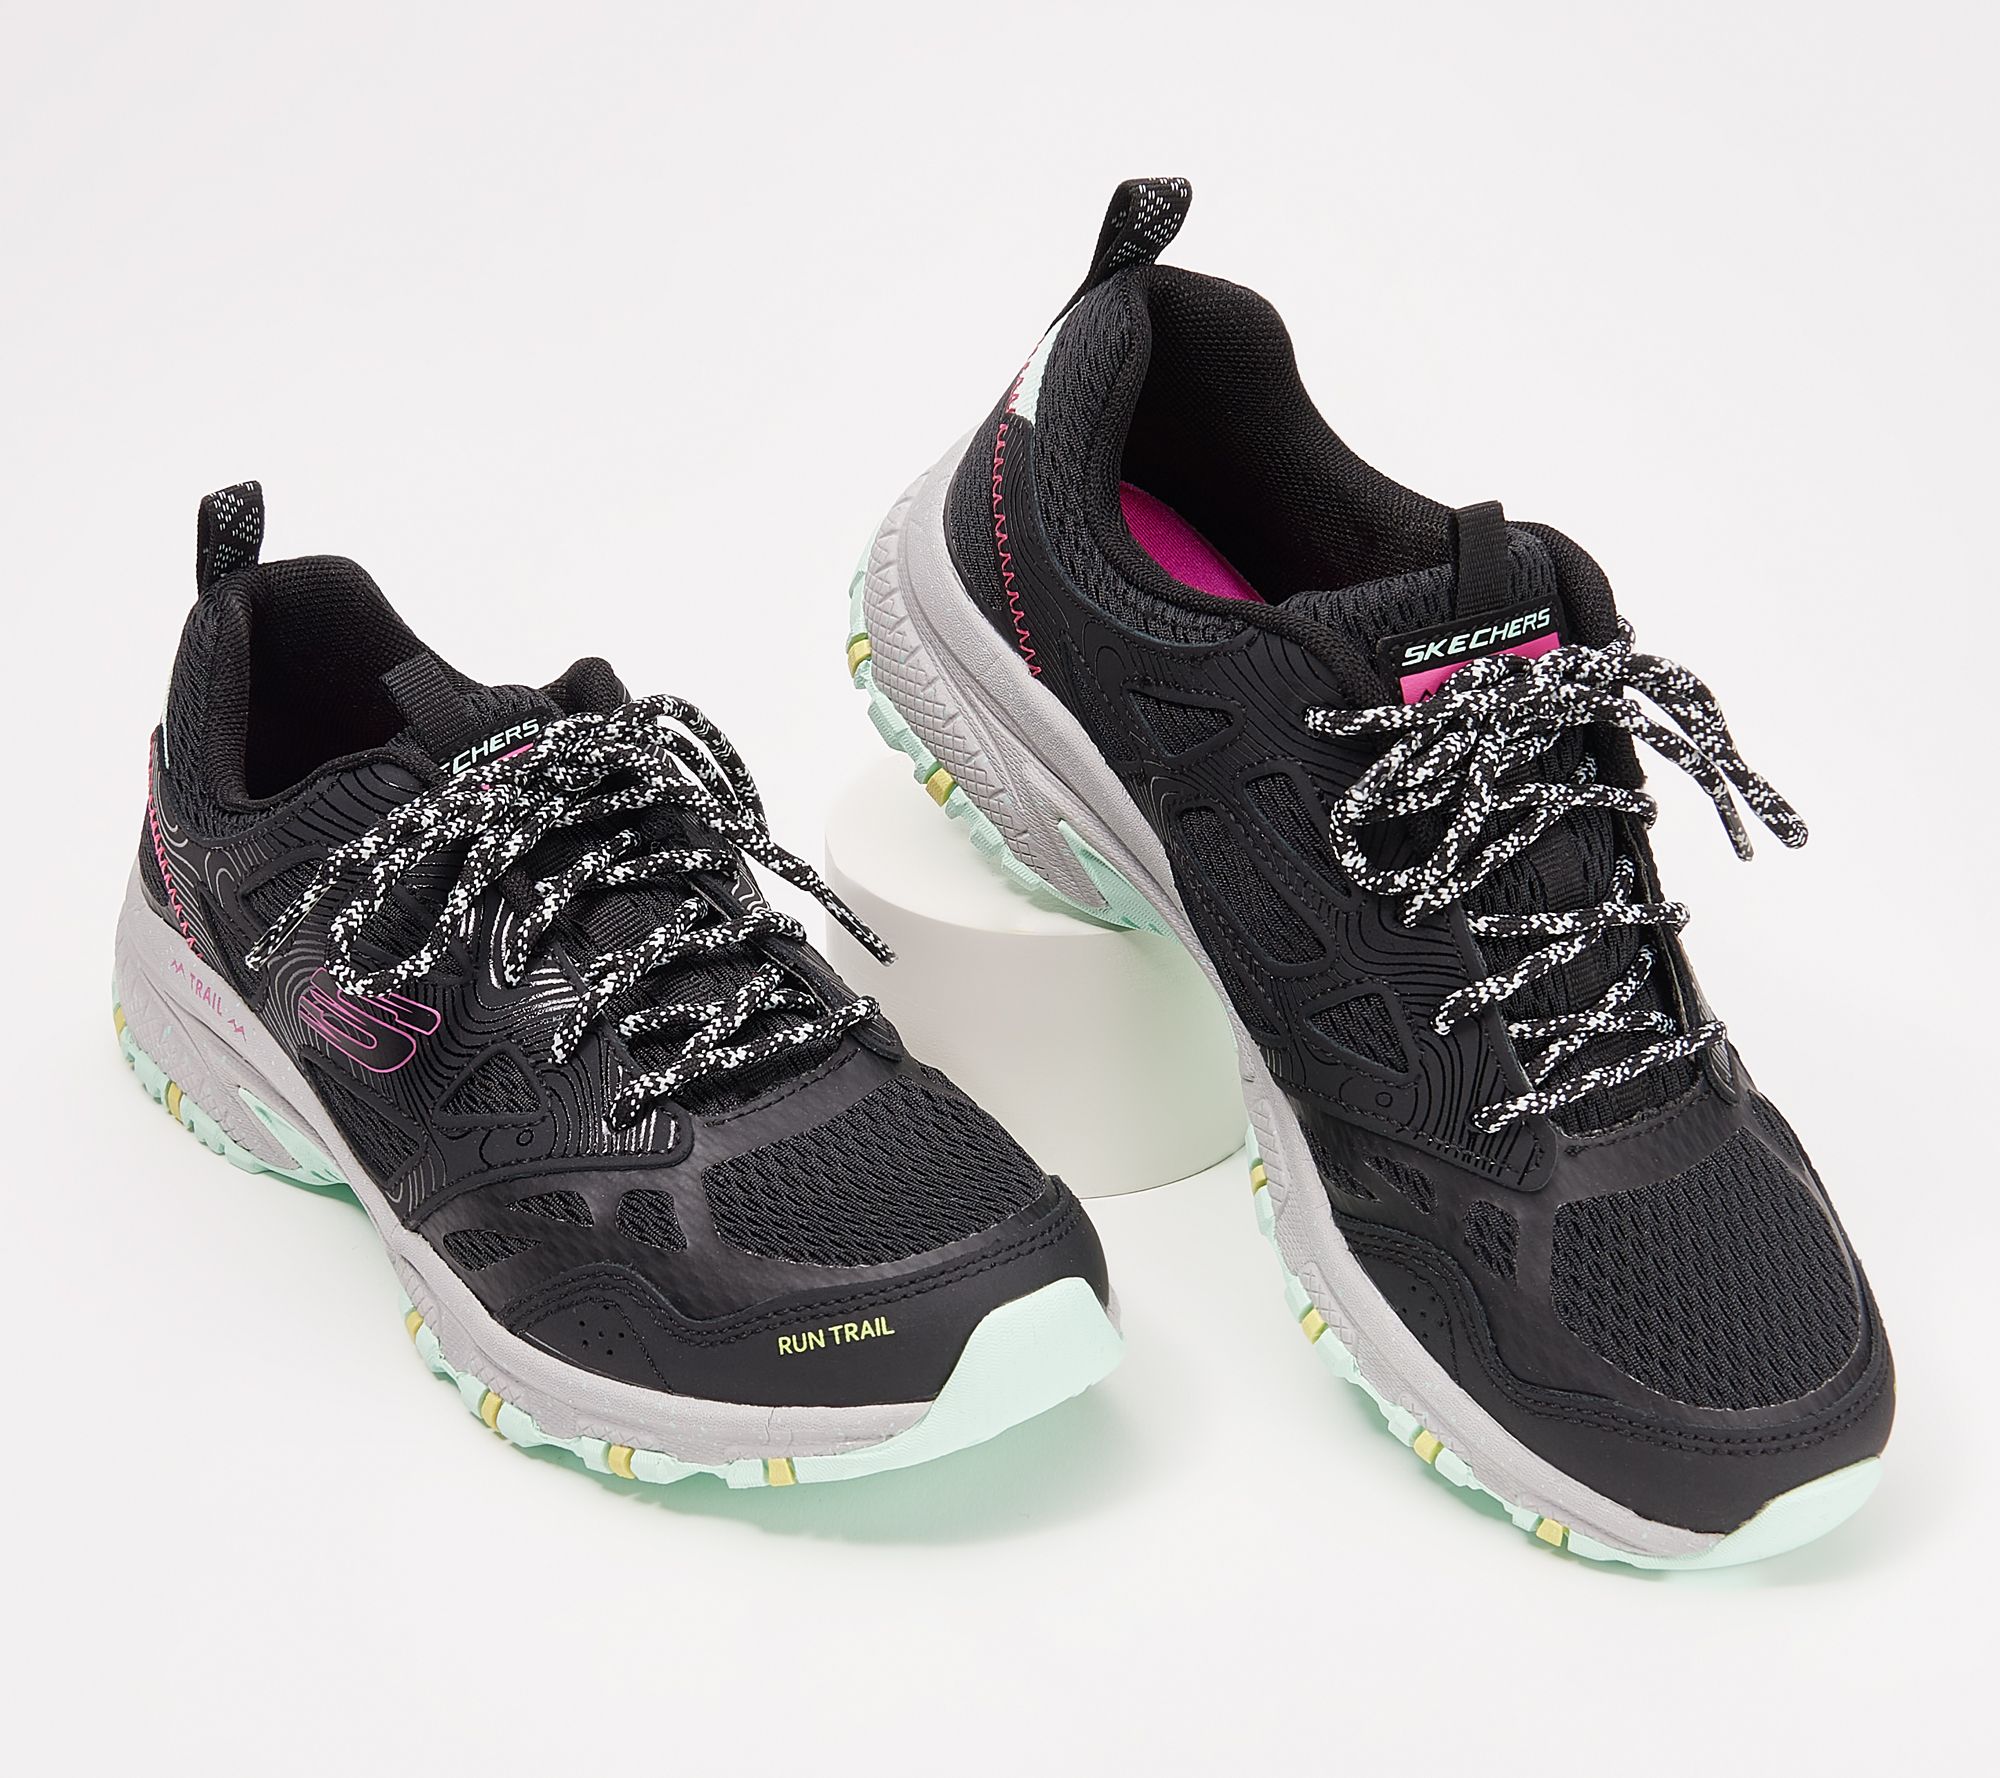 As Is"Skechers Hillcrest Trail Sneakers Pure Escapade - QVC.com